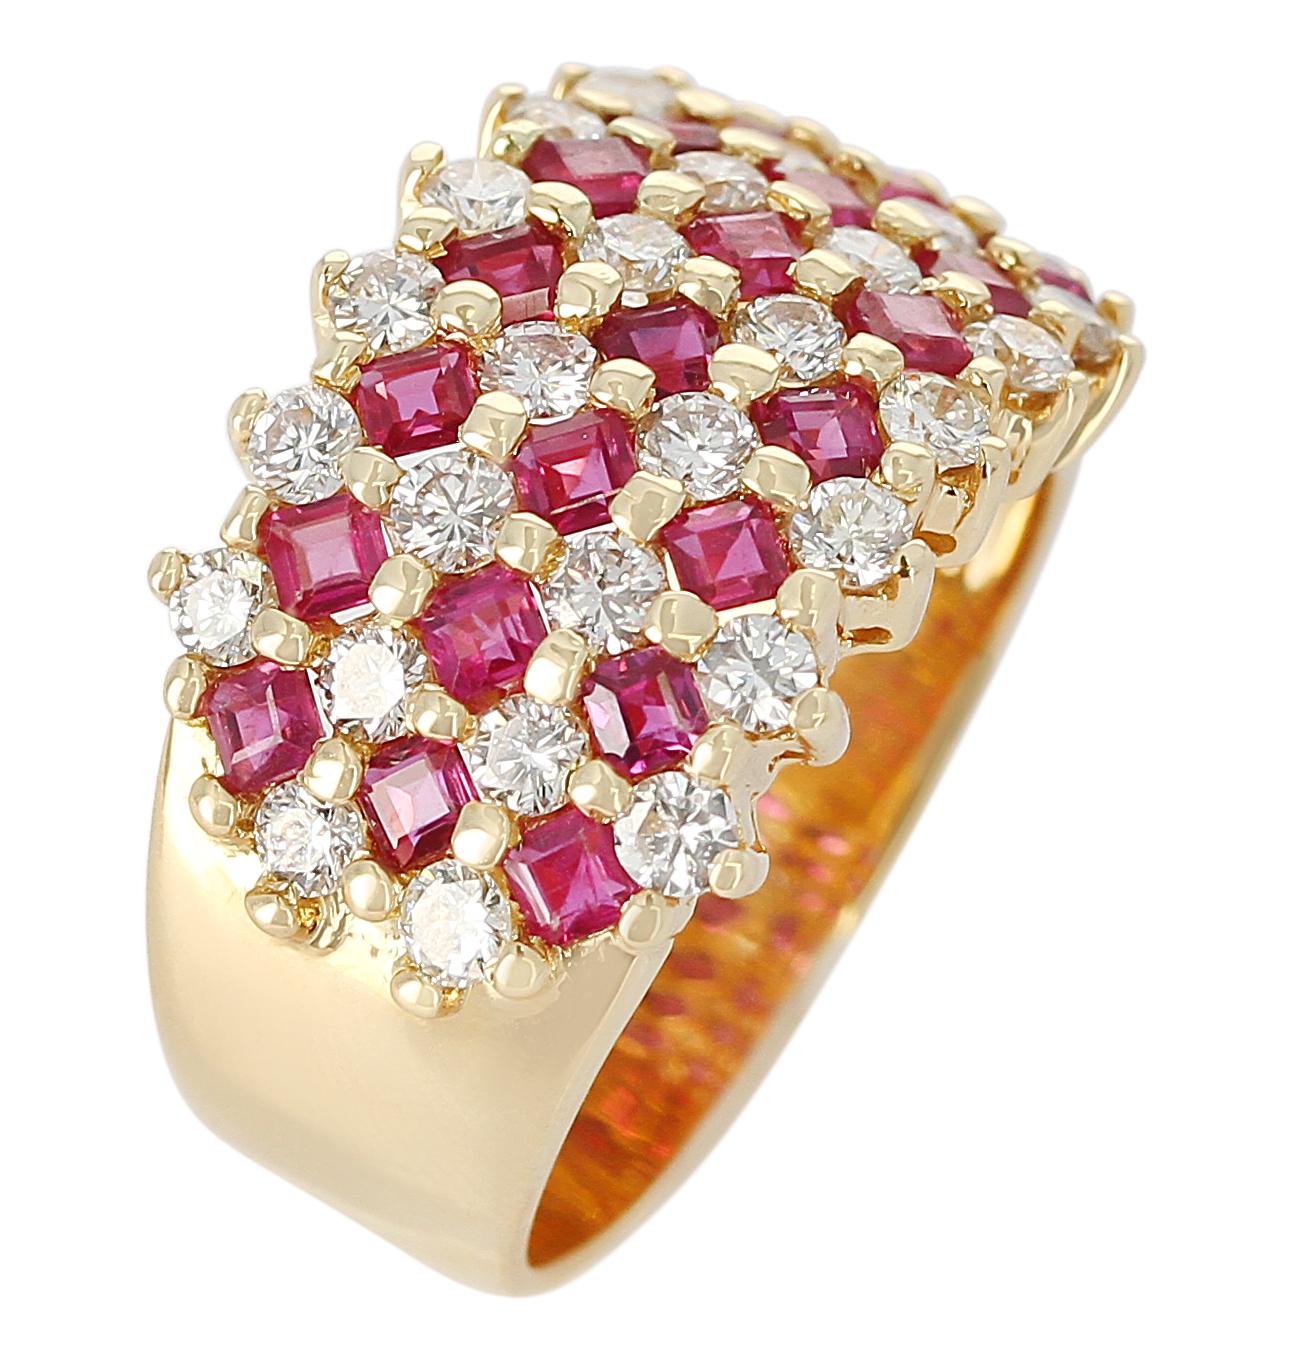 A Seven Row-Patterned Ruby and Diamond Ring in 18 Karat Yellow Gold. The diamond weight is 1.47 carats, and the weight of the rubies is 1.97 carats. Total Weight: 11.38 grams. Ring Size US 8.75.